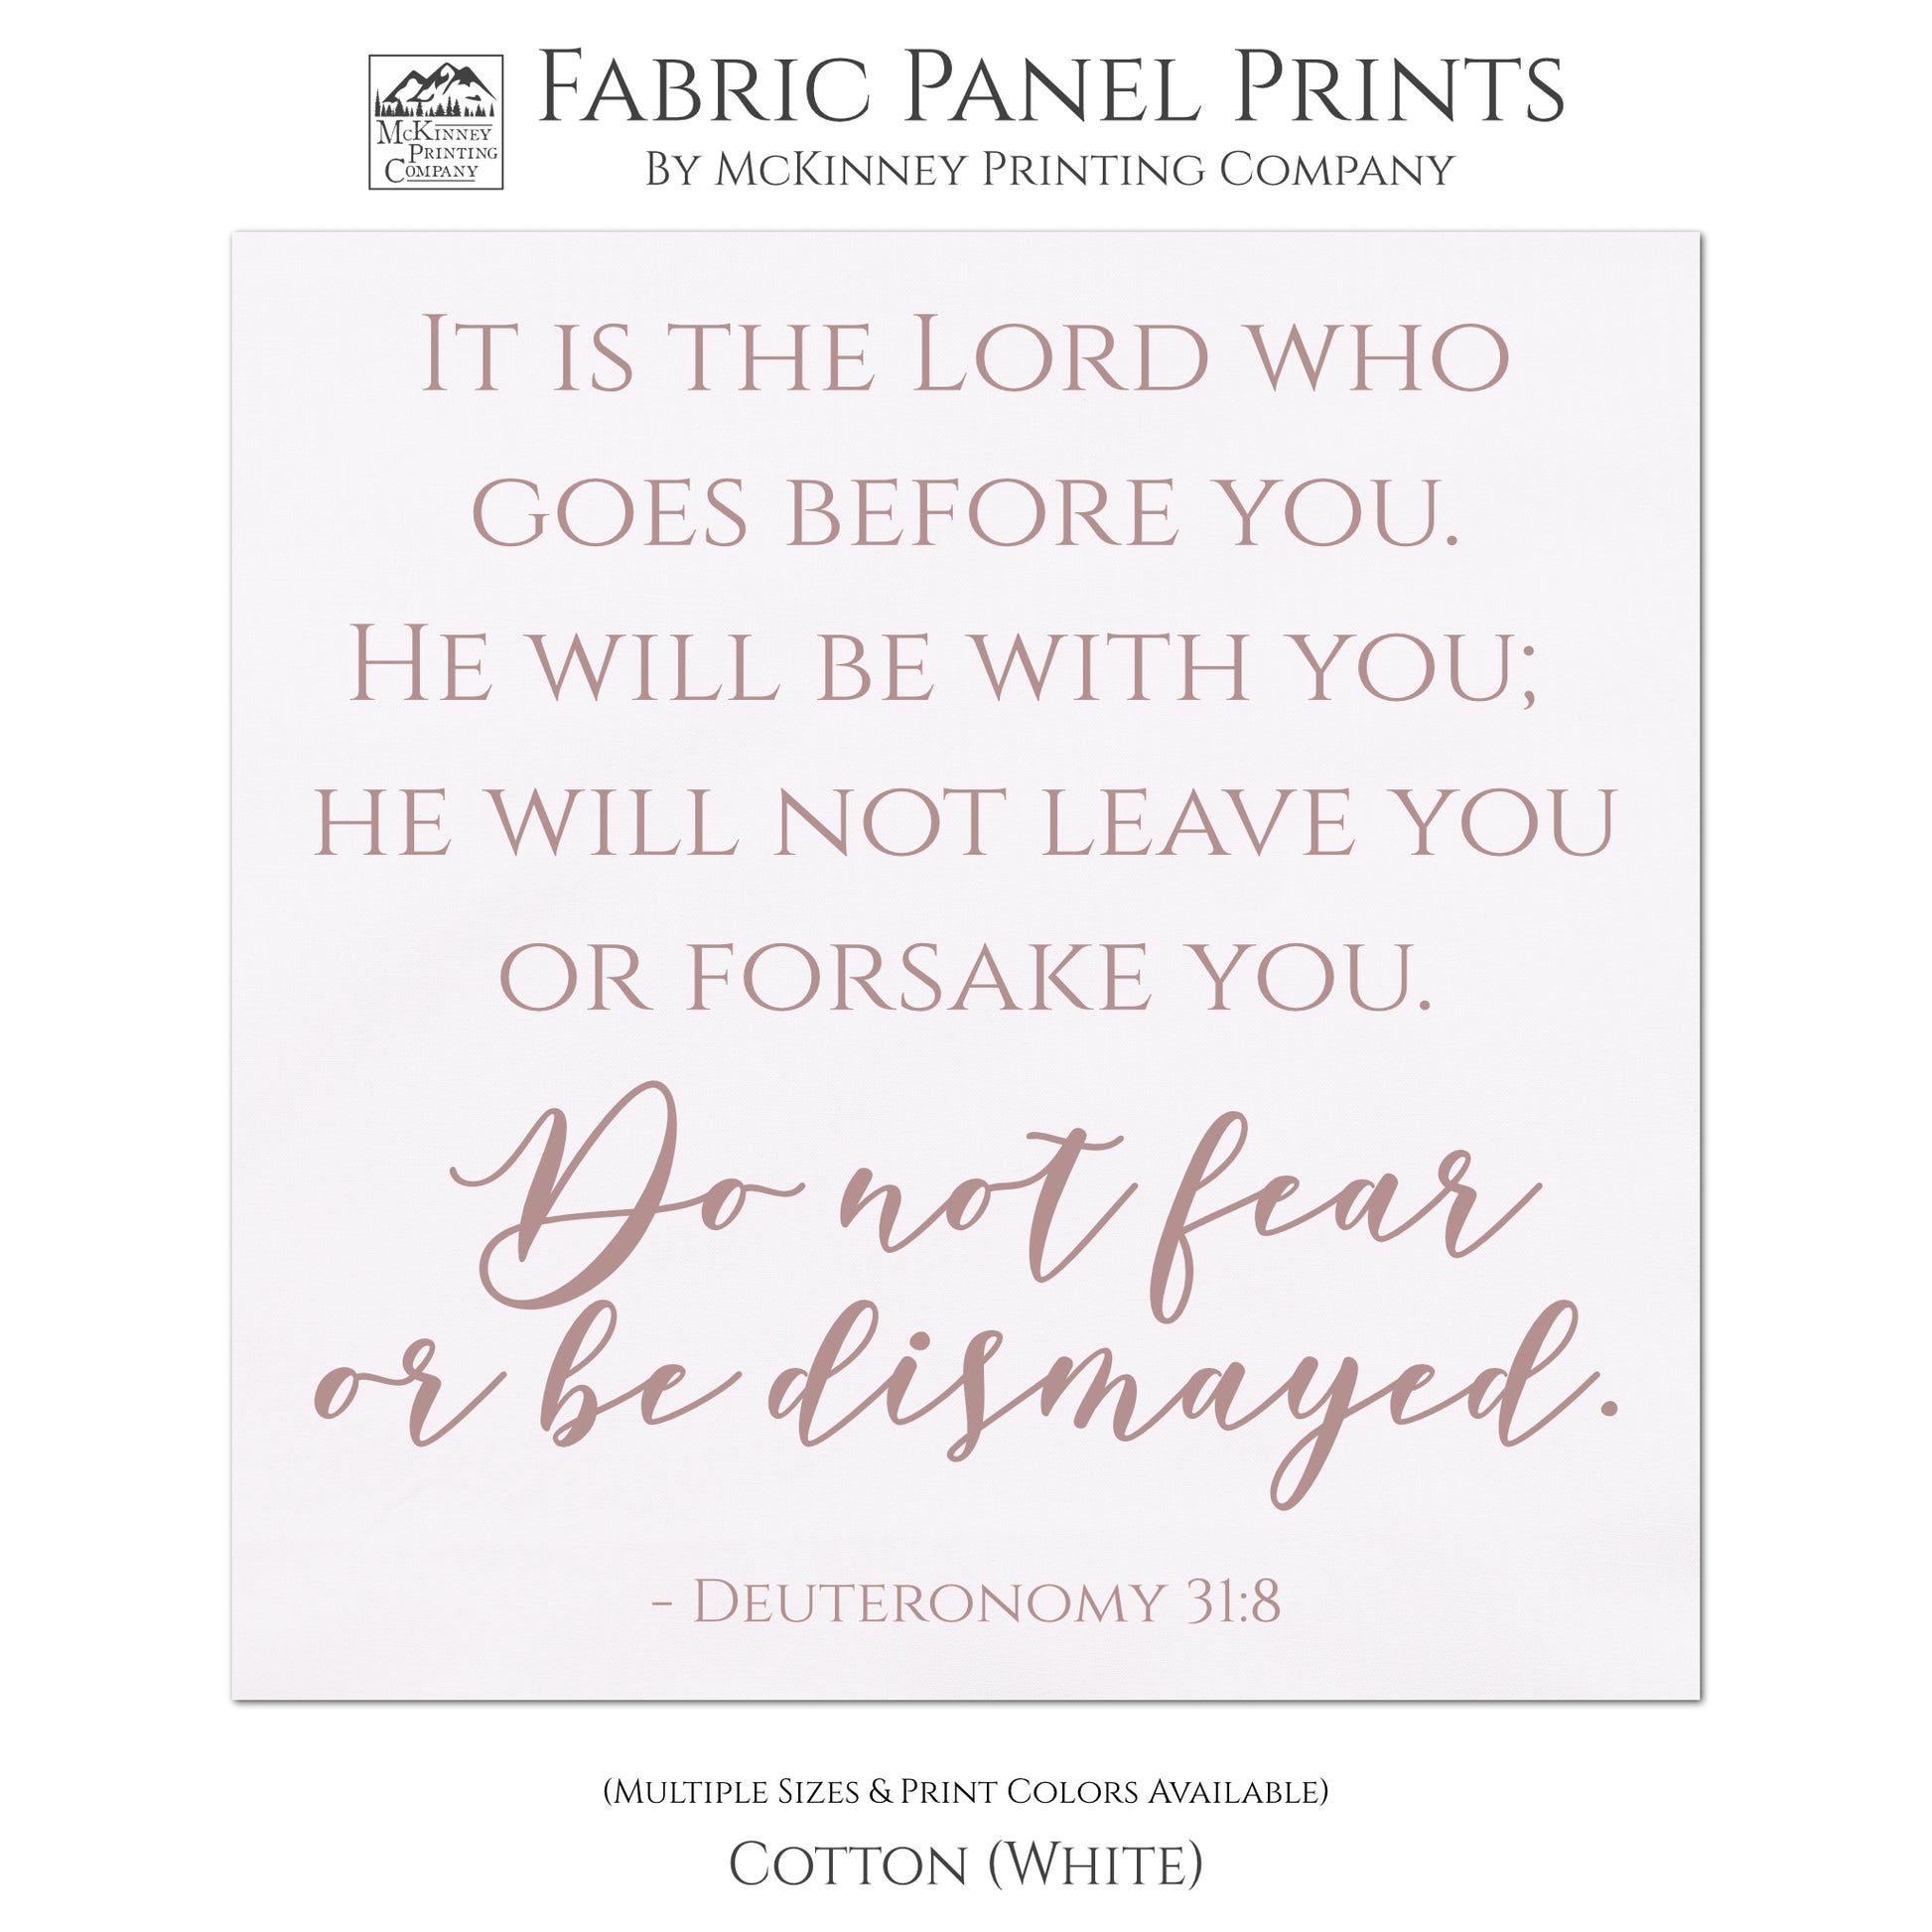 It is the Lord who goes before you. He will be with you; He will not leave you or forsake you. Do not fear or be dismayed. Deuteronomy 31:8 - Scripture Fabric Panel for Quilting and Crafting and Wall Art - Cotton, White